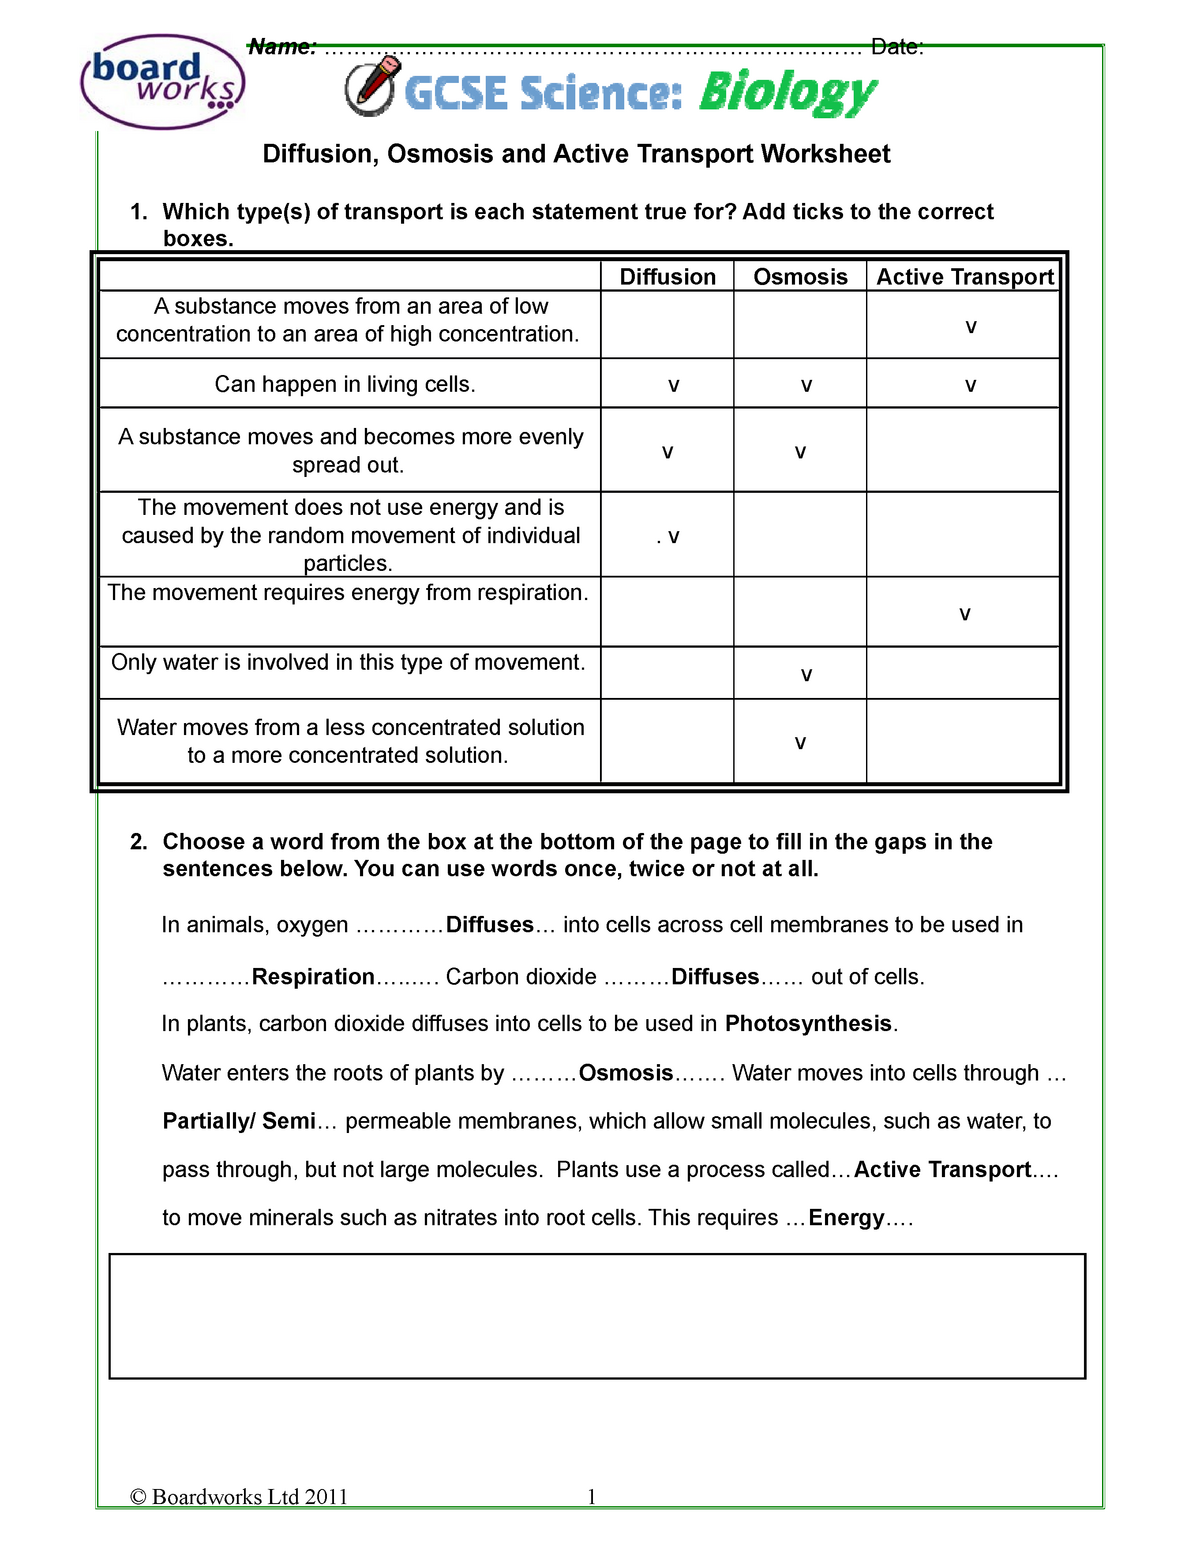 Diffusion Osmosis and Active Transport Worksheet F22 - BP 22 For Diffusion And Osmosis Worksheet Answers